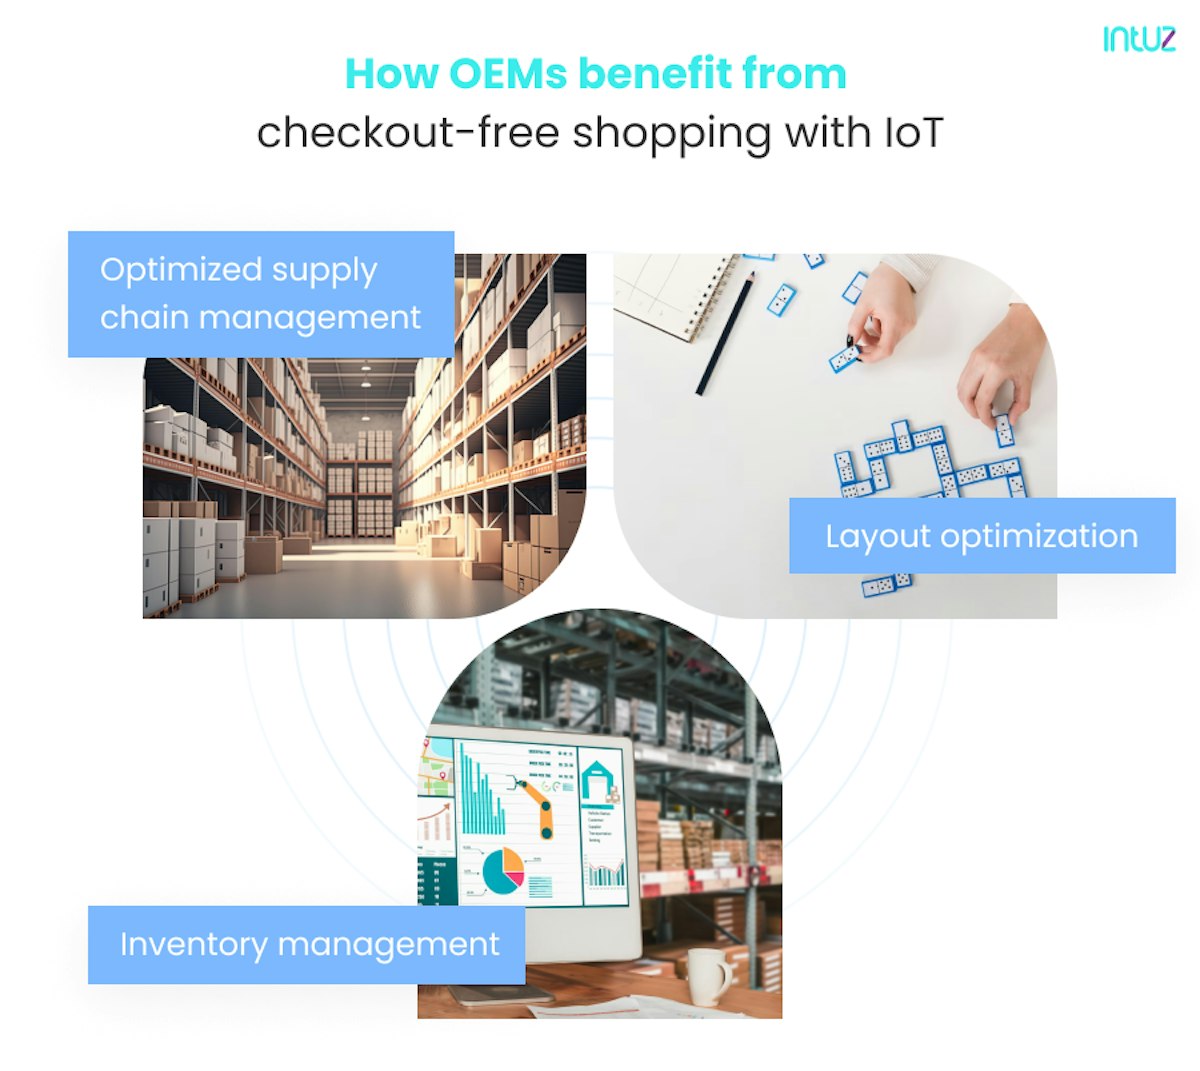 OEM's Benefits in Checkout free shopping